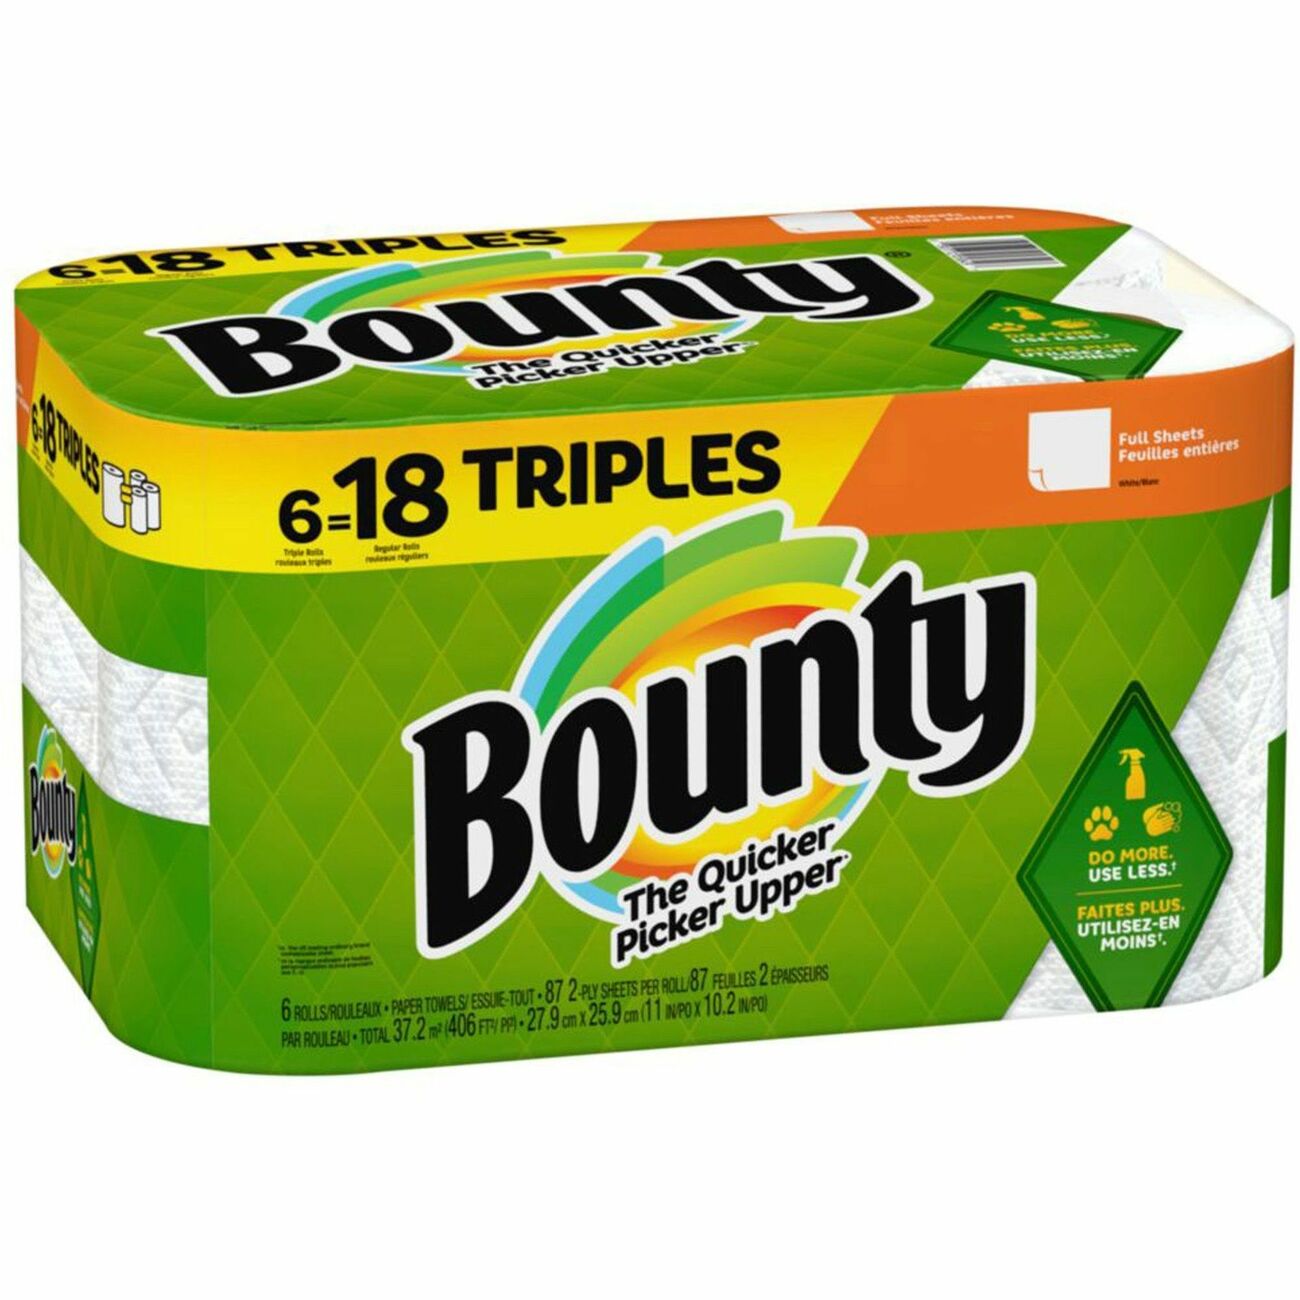  Bounty Select-A-Size Paper Towels, White, 2 Double Plus Rolls =  5 Regular Rolls : Health & Household